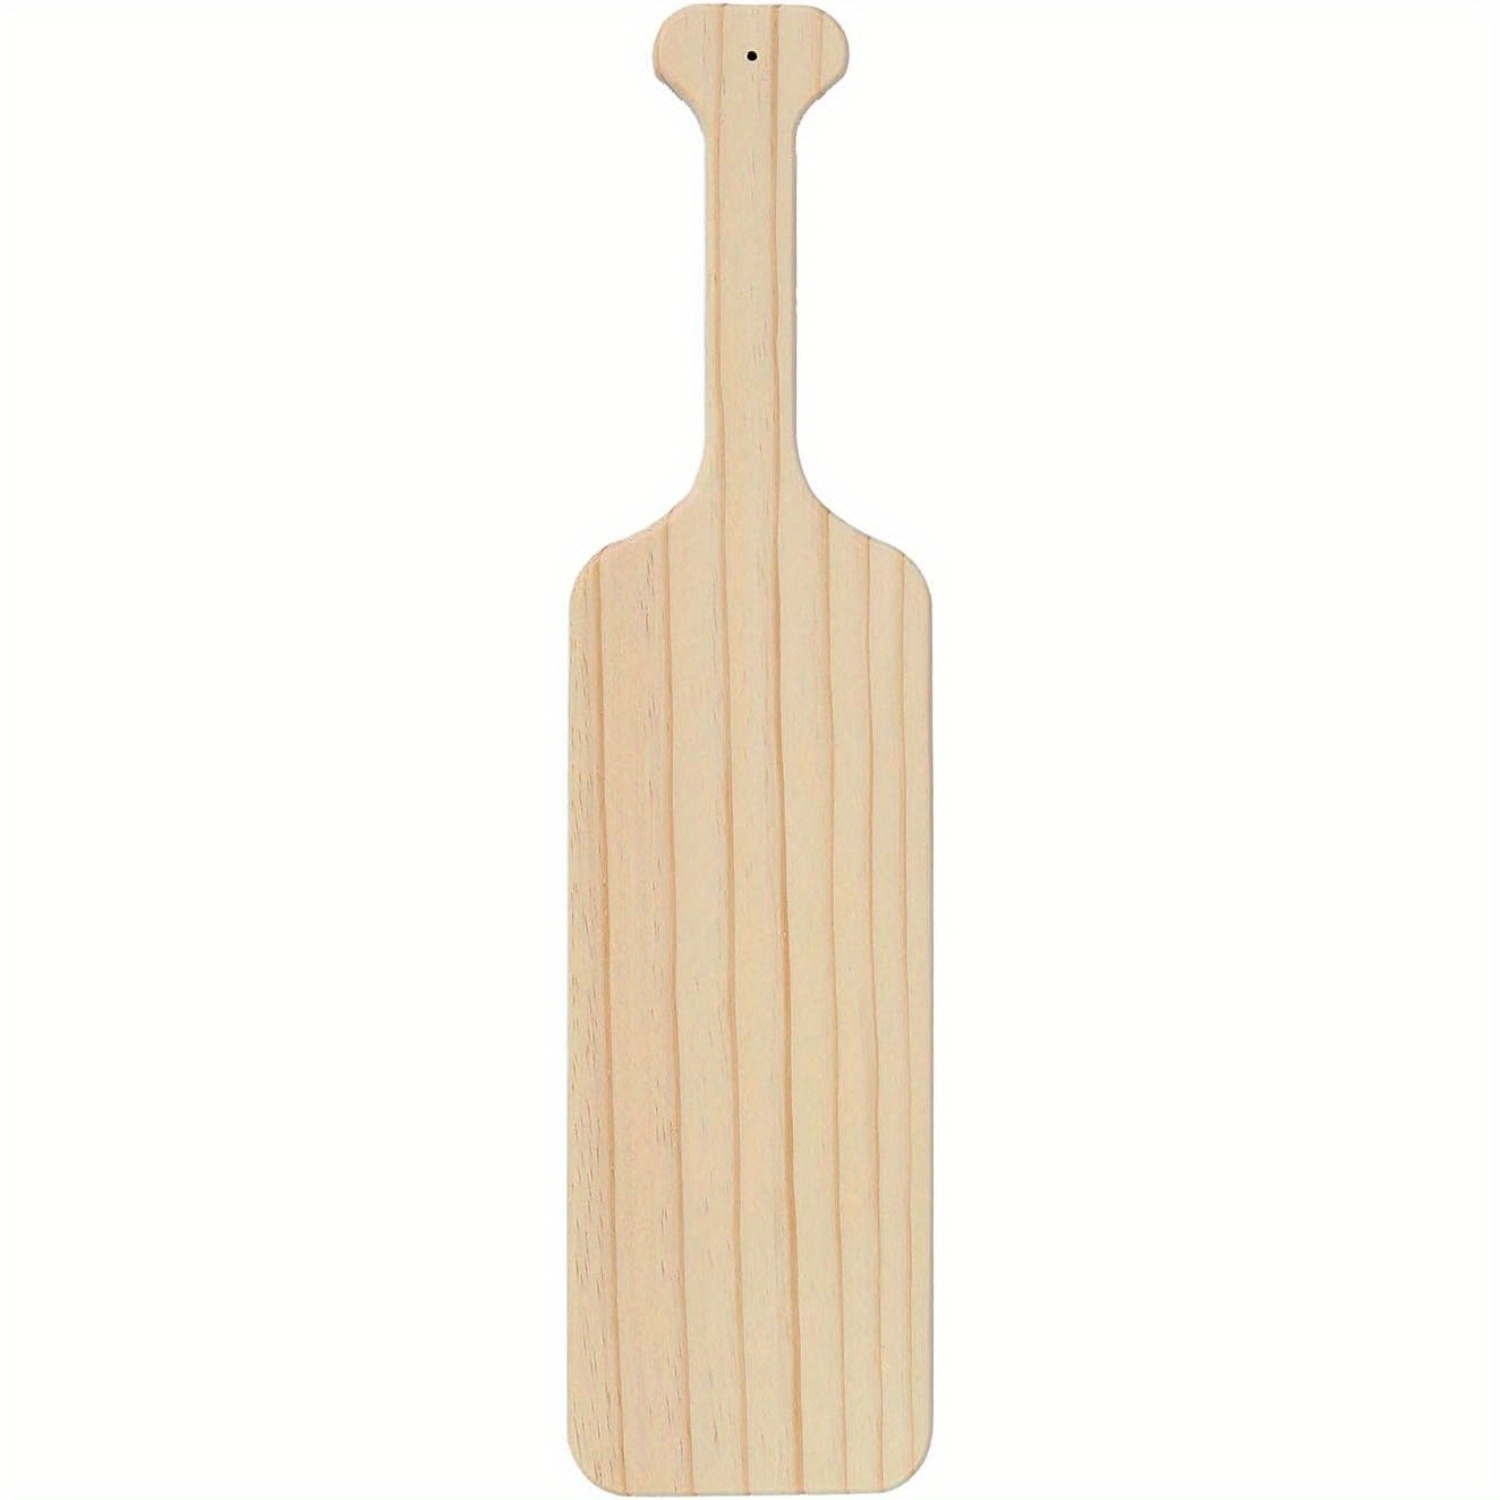  VENESUN 18in Greek Sorority Paddle, Solid Wooden Fraternity  Paddle, Unfinished Pine Wood Paddle, Frat Paddle